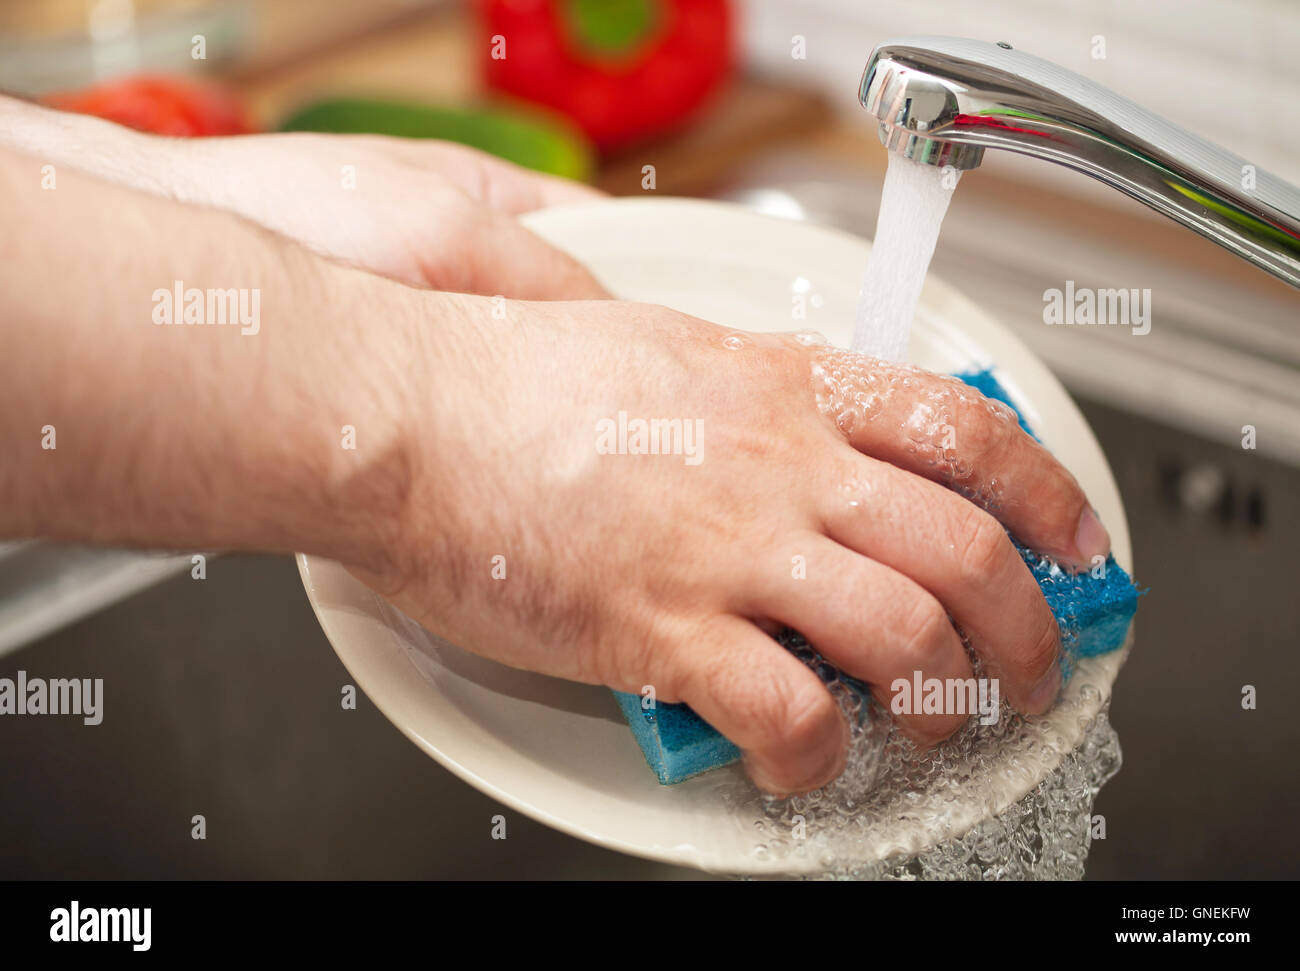 Victorian Kitchen Maid Washing Dishes In Sink. Stock Photo, Picture and  Royalty Free Image. Image 67536884.